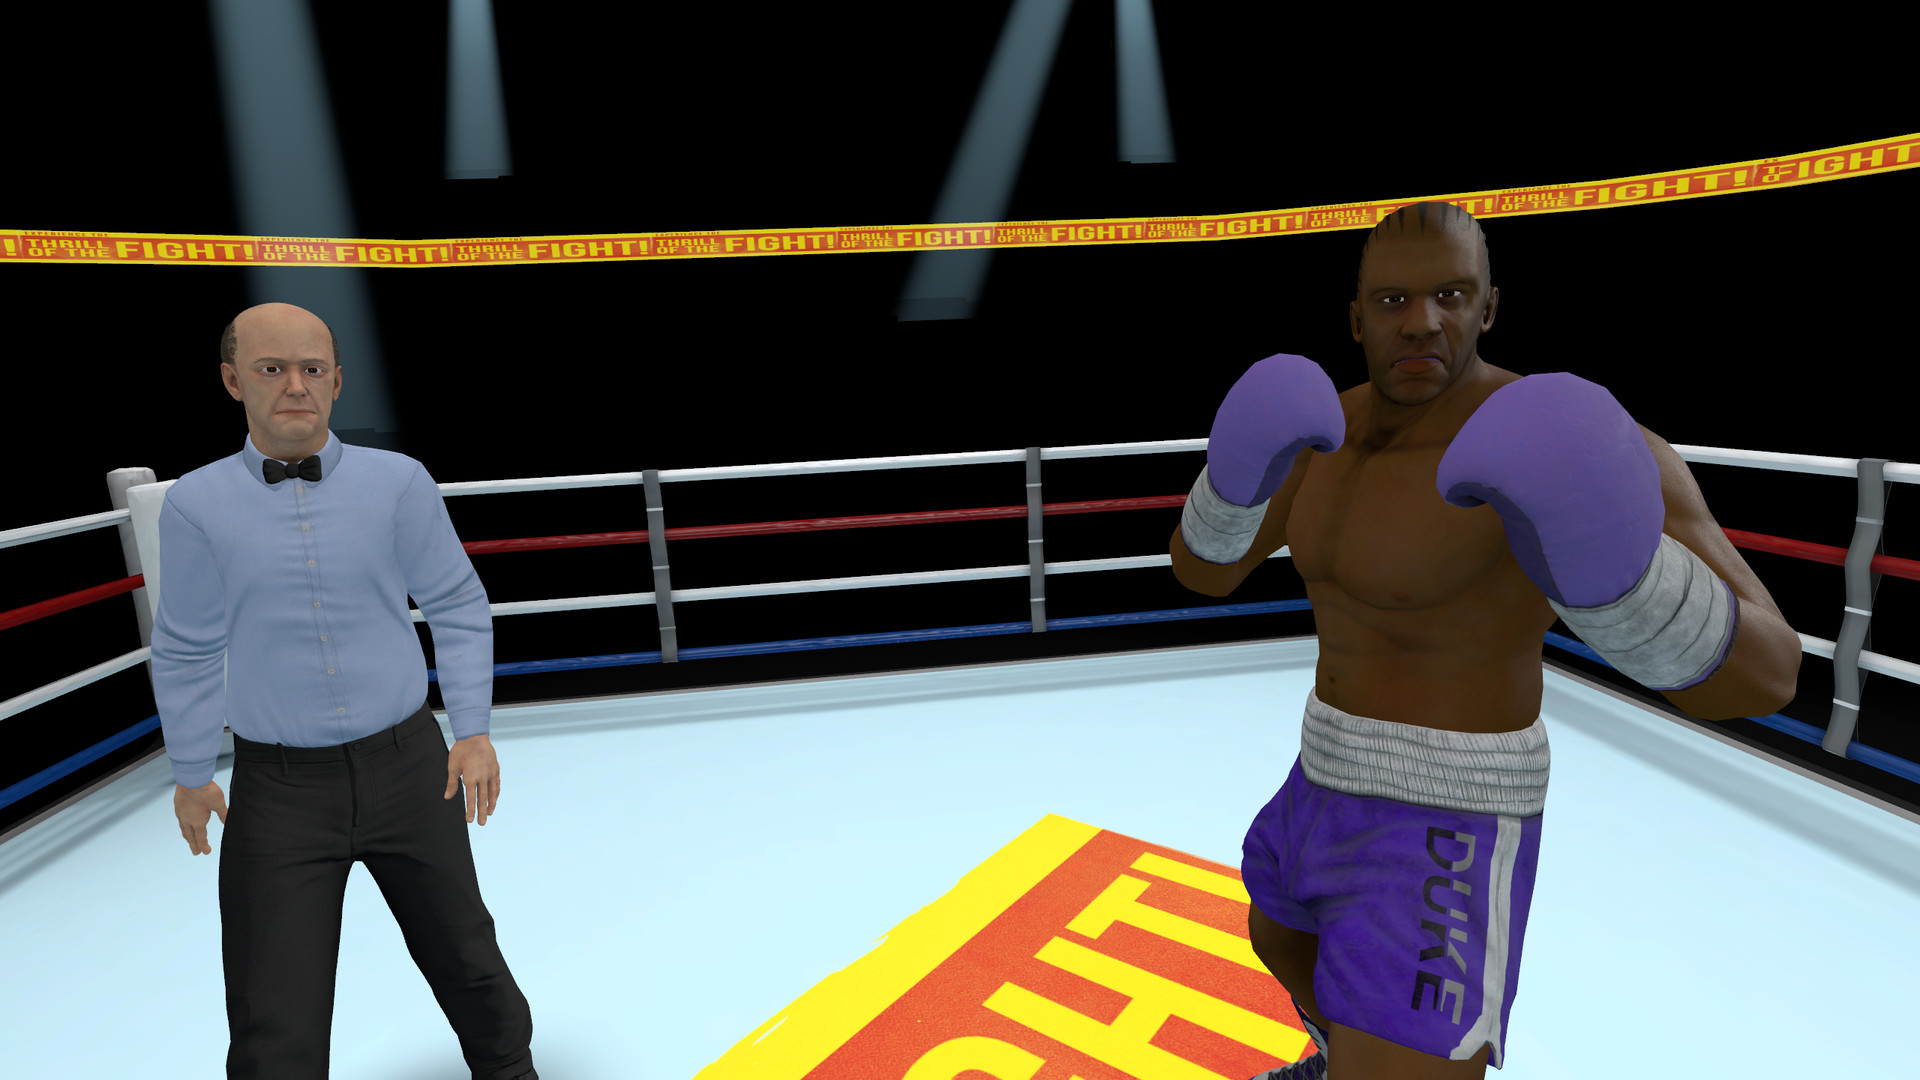 Thrill of the Fight 2 is coming to VR, start your training montages right now